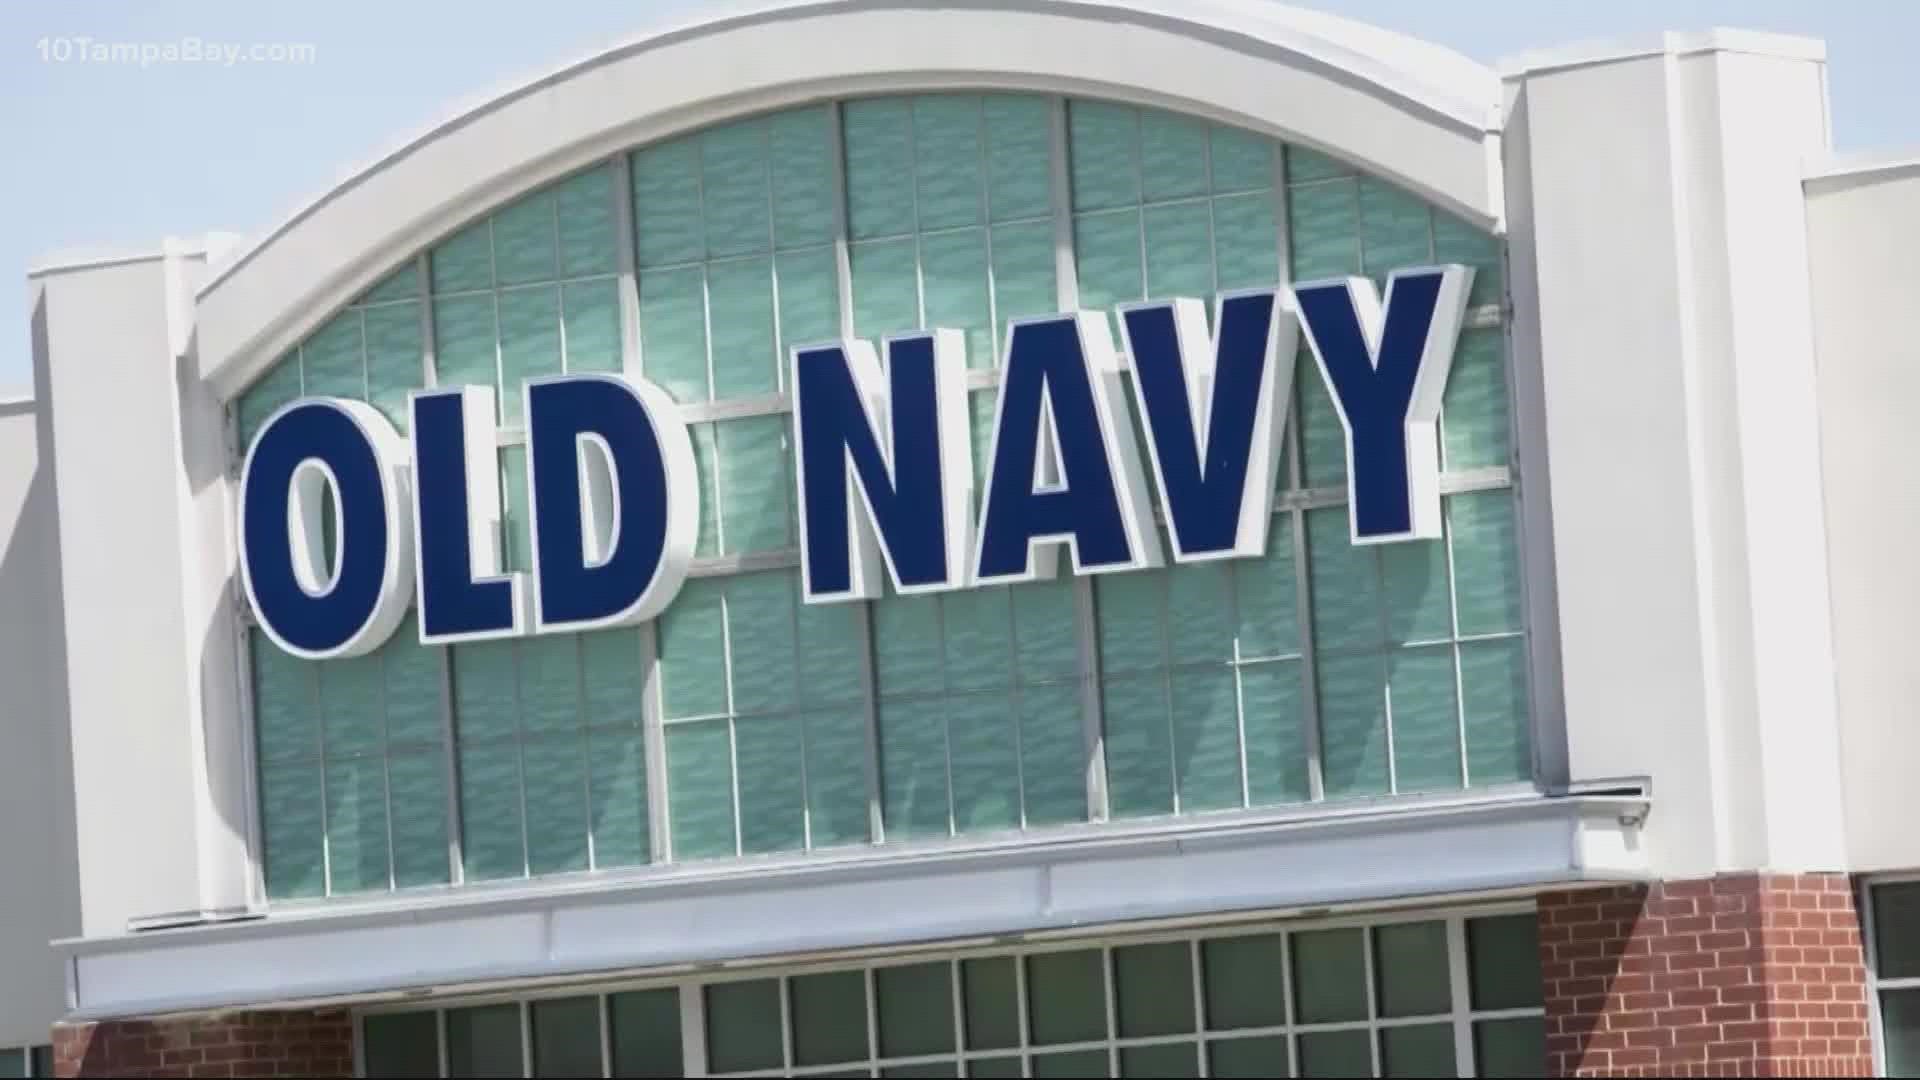 People who made a purchase at Old Navy between Nov. 12, 2015, and Dec. 2, 2021, could be eligible to receive store certificates worth up to $10.